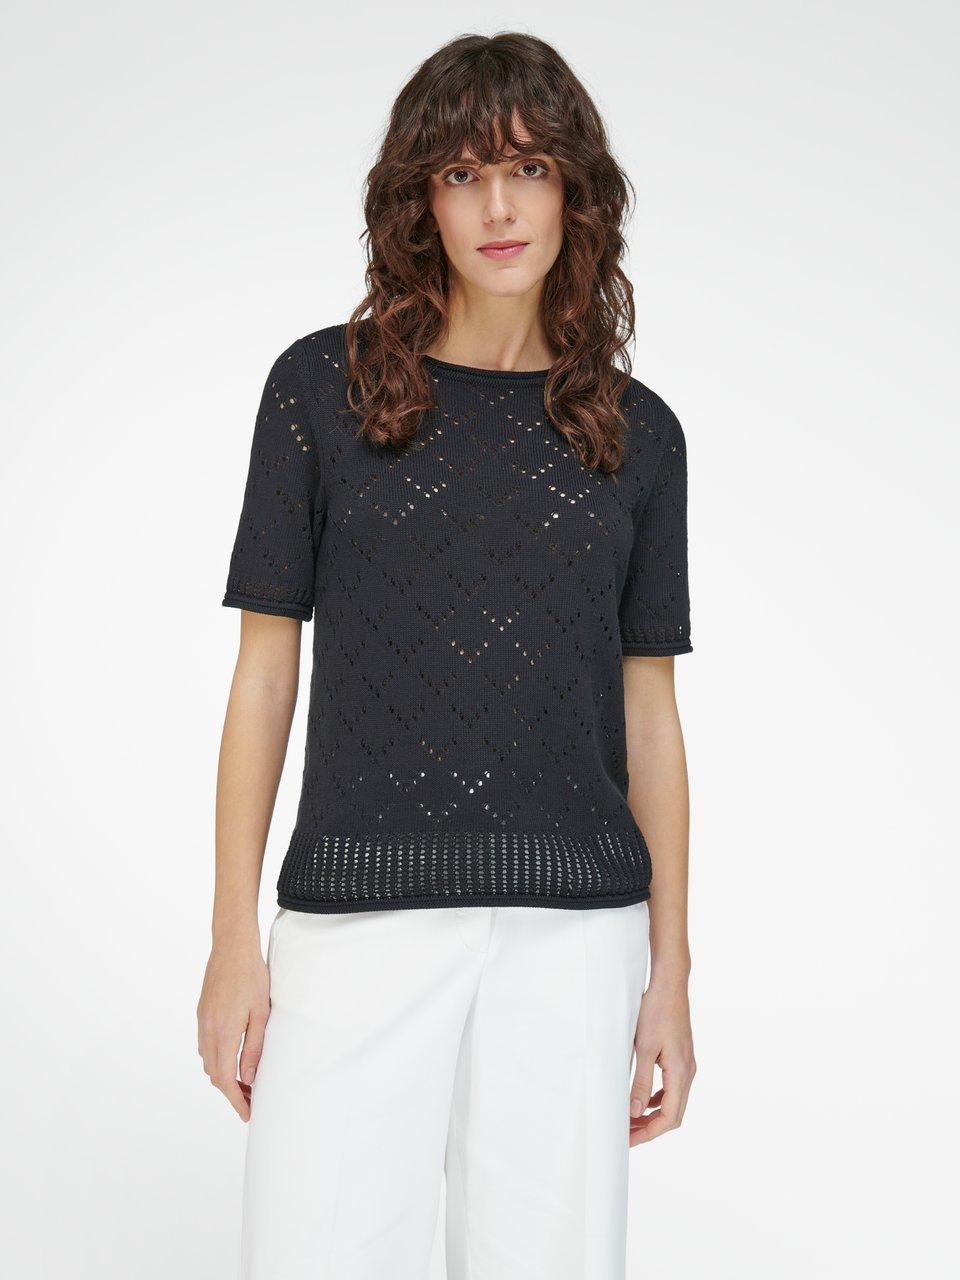 Peter Hahn - Le pull 100% coton